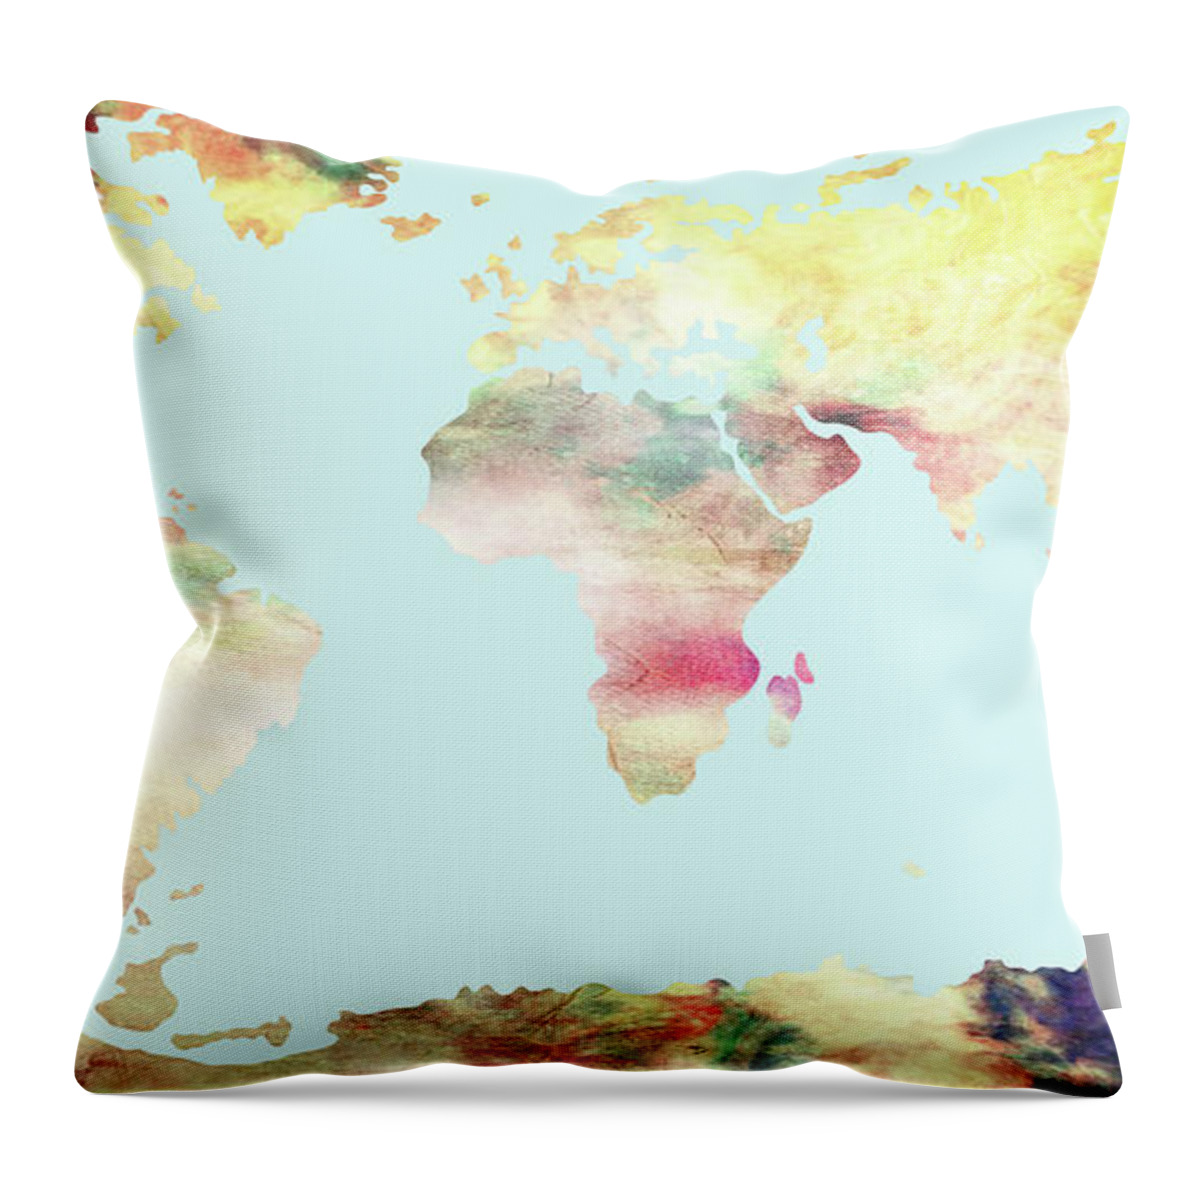 Wright Throw Pillow featuring the digital art We Are All In This Together by Paulette B Wright